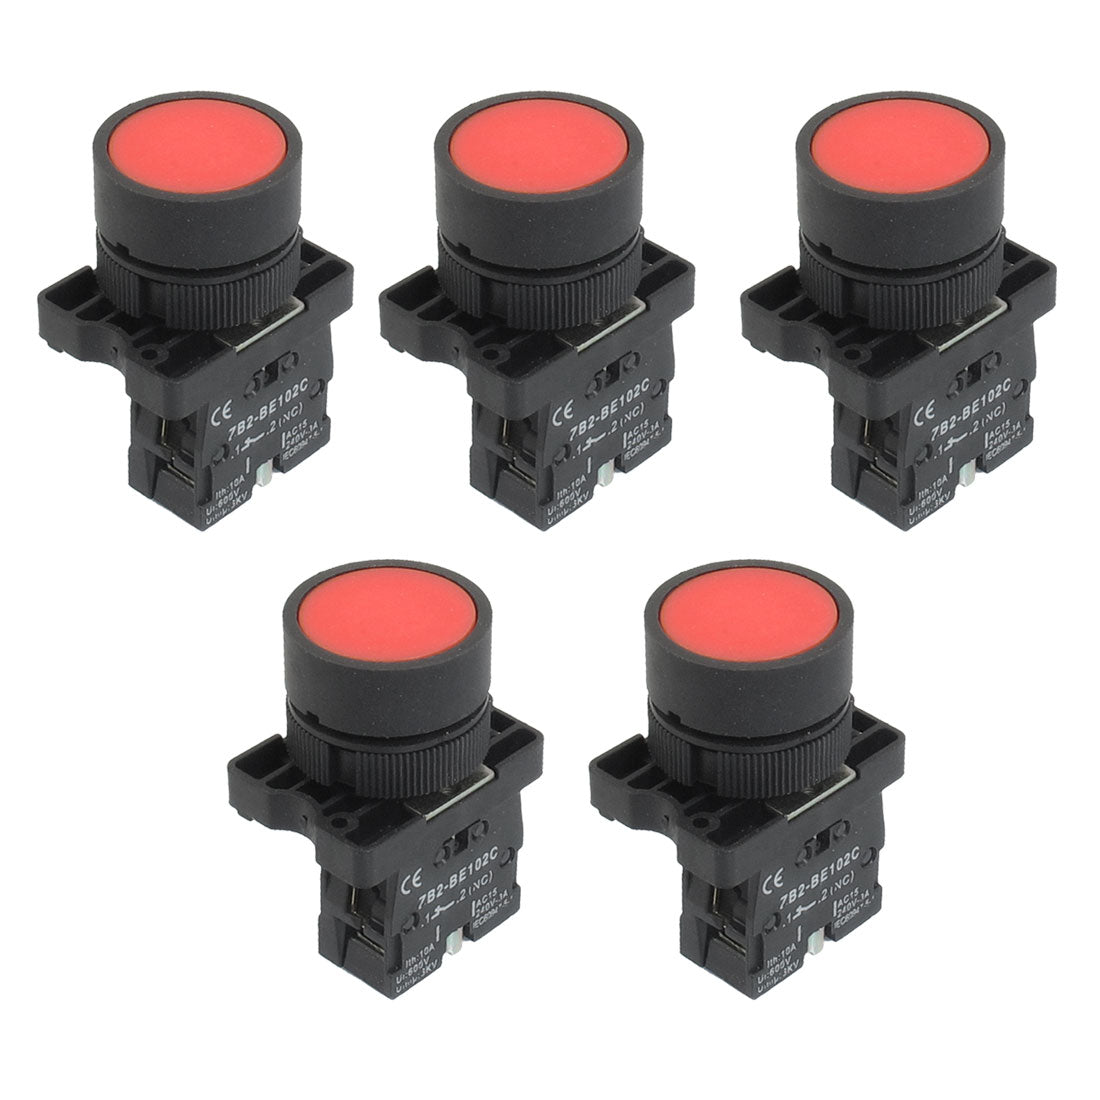 uxcell Uxcell 5pcs 22mm 1 NC N/C Red Sign Momentary Push Button Switch 600V 10A ZB2-EA42